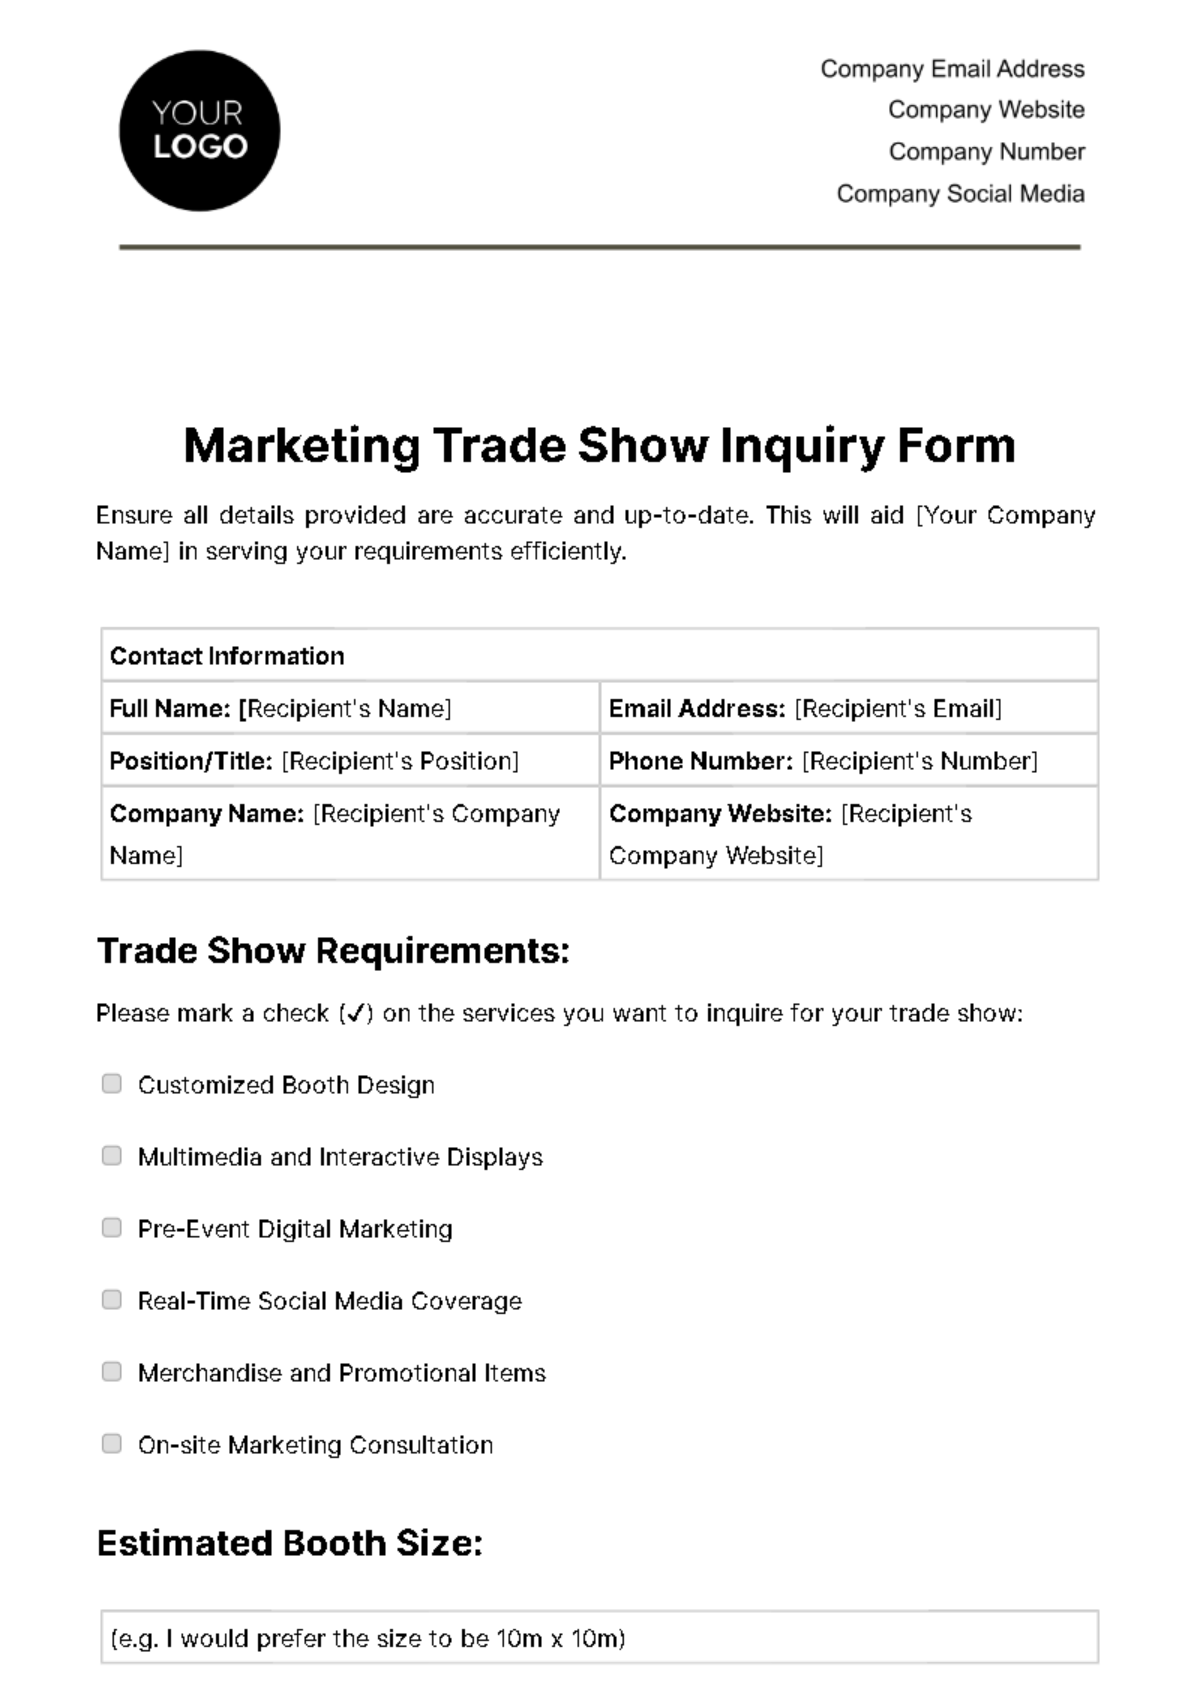 Free Marketing Trade Show Inquiry Form Template